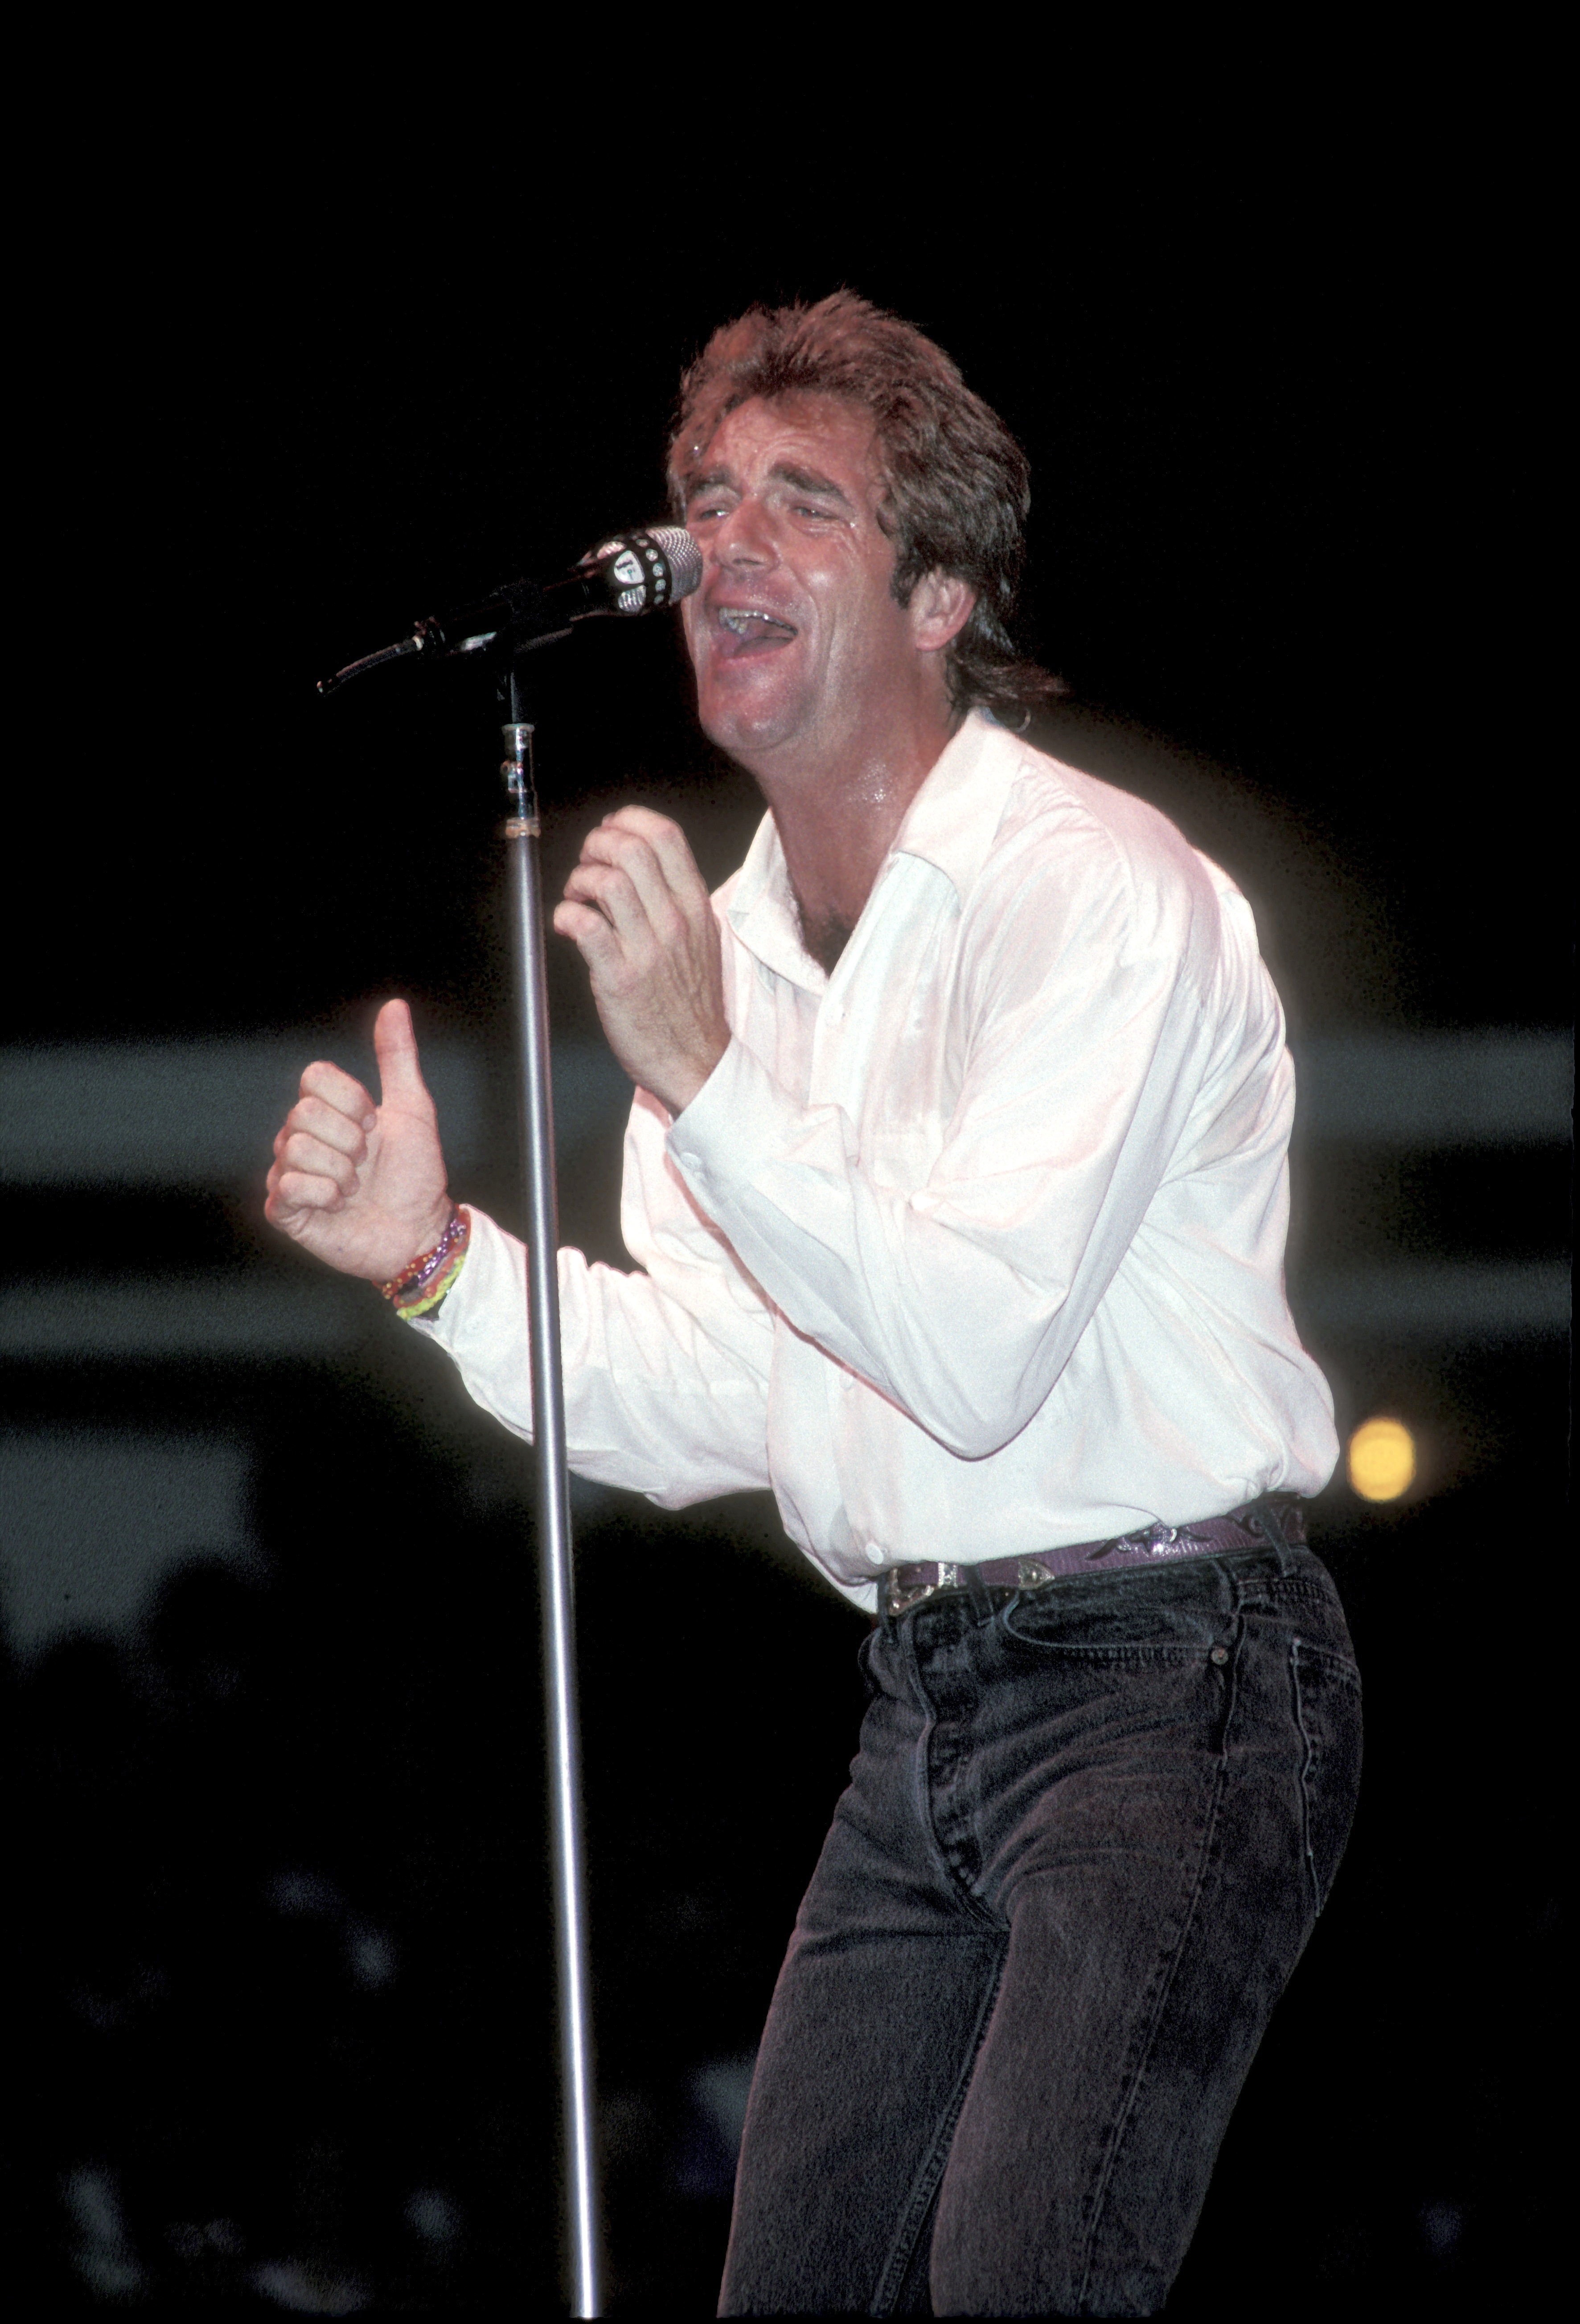 The musician during a live performance on August 31, 1992. | Source: Getty Images